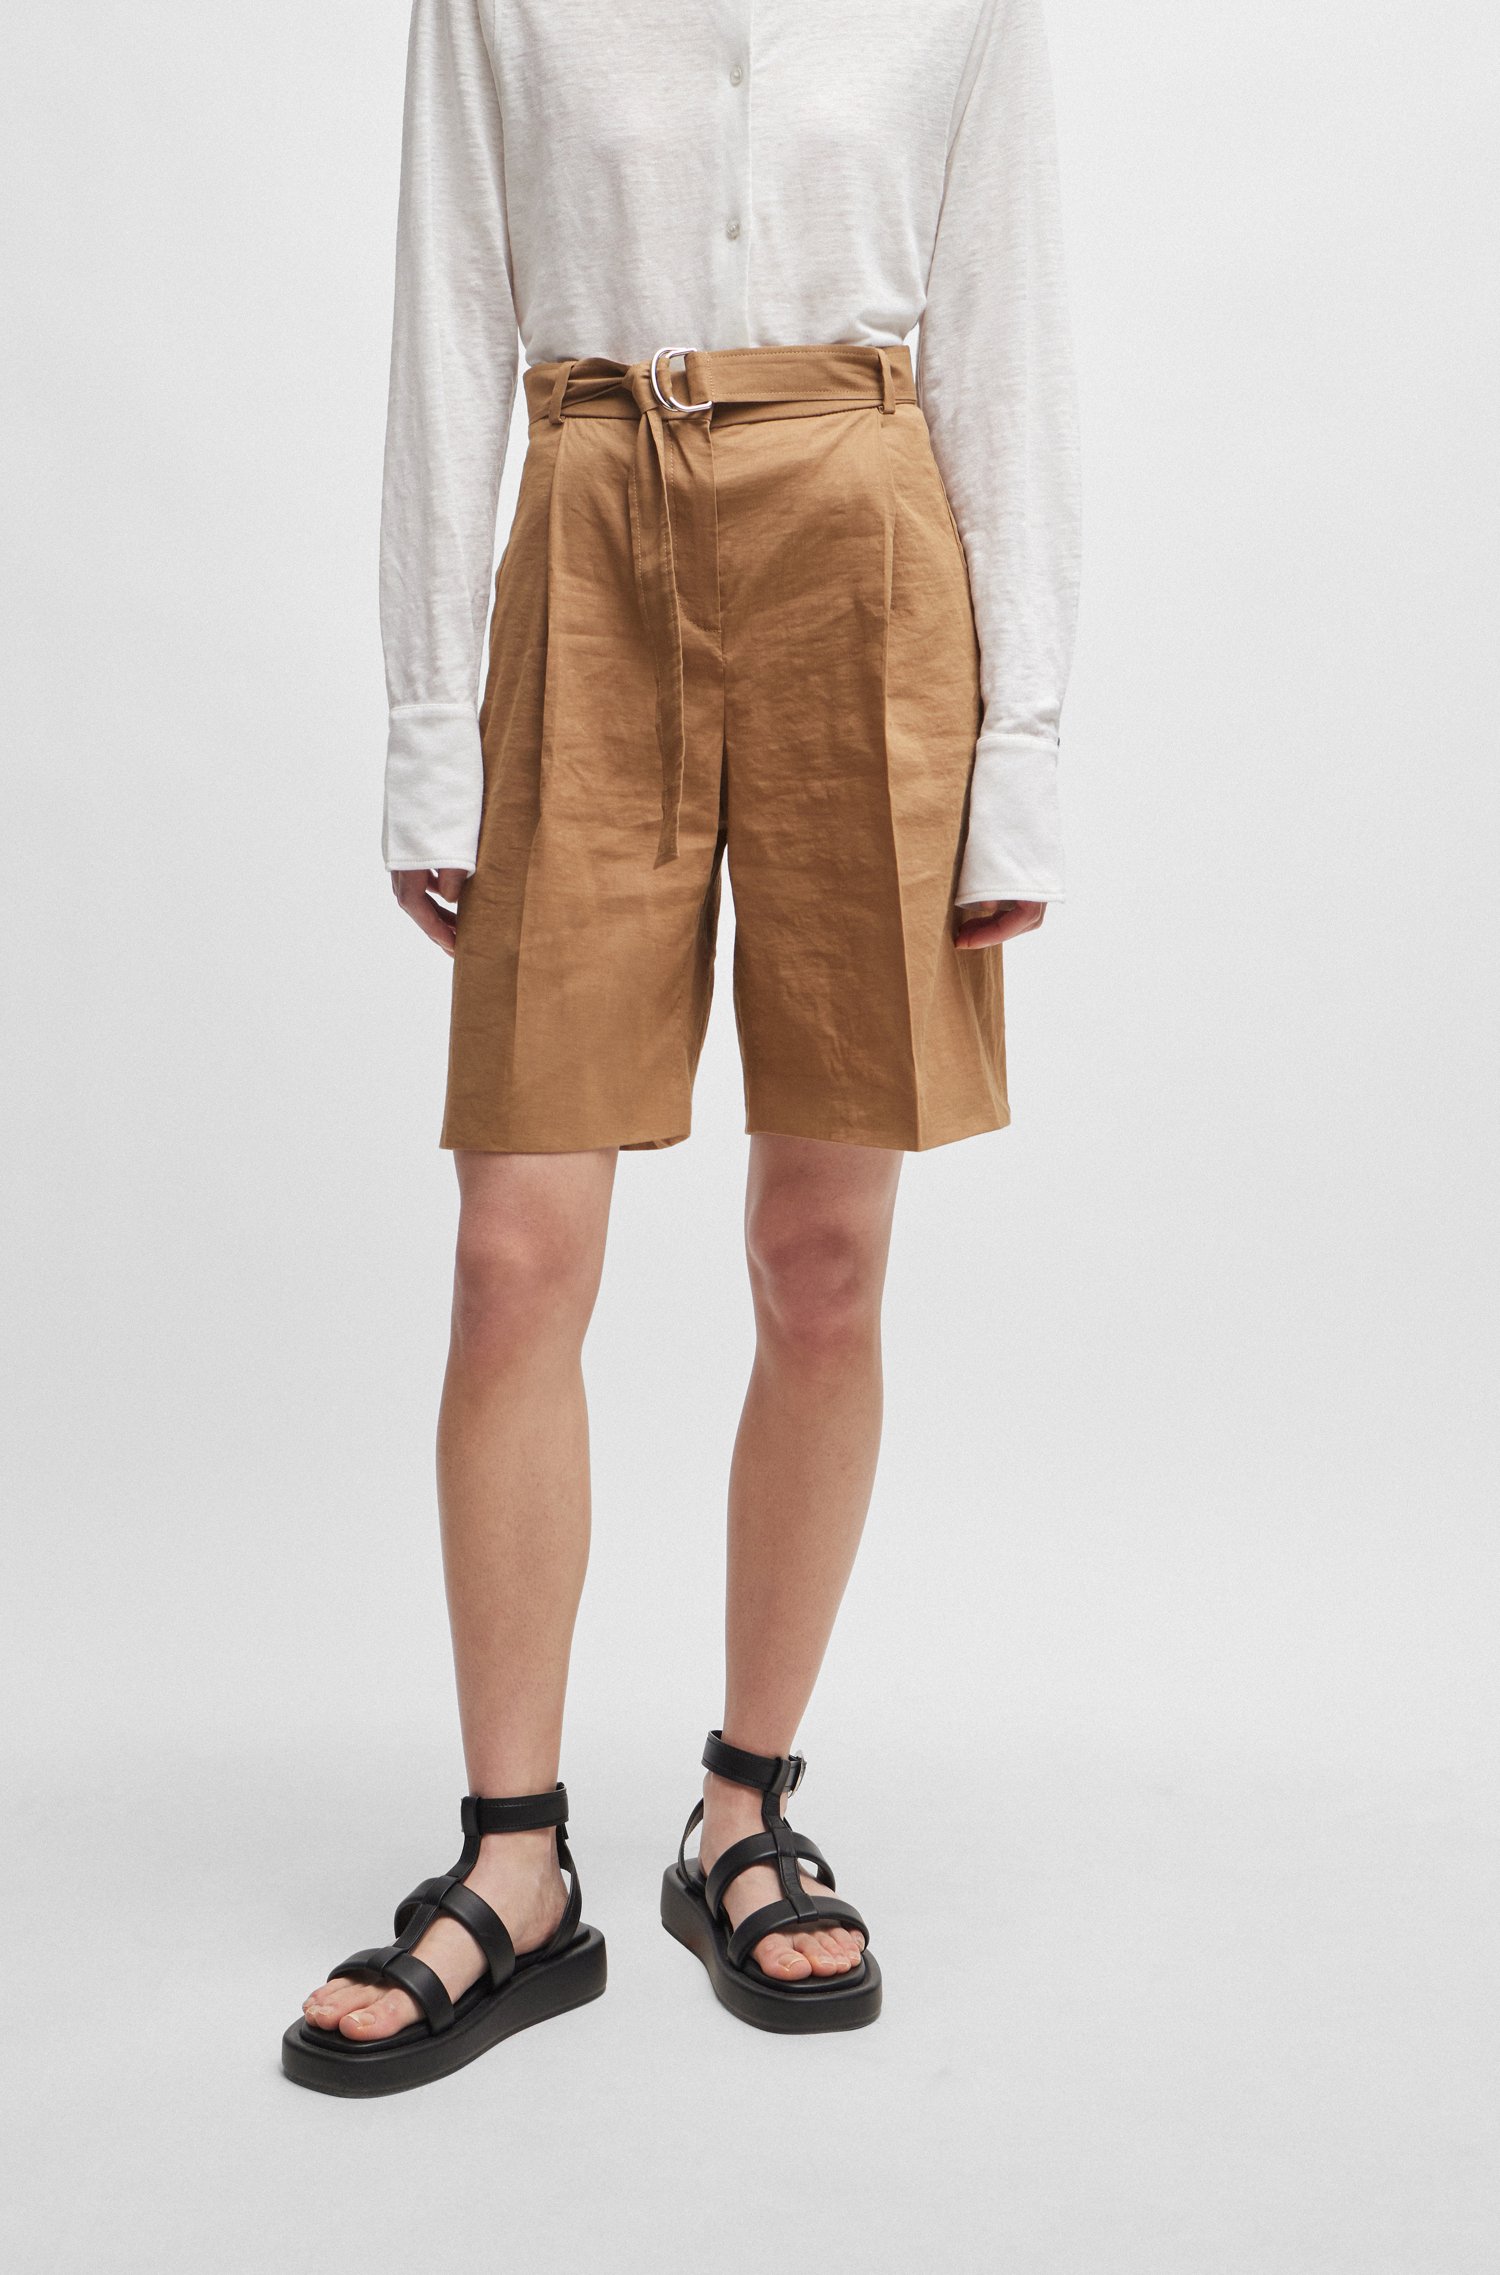 Relaxed-fit shorts a stretch linen blend